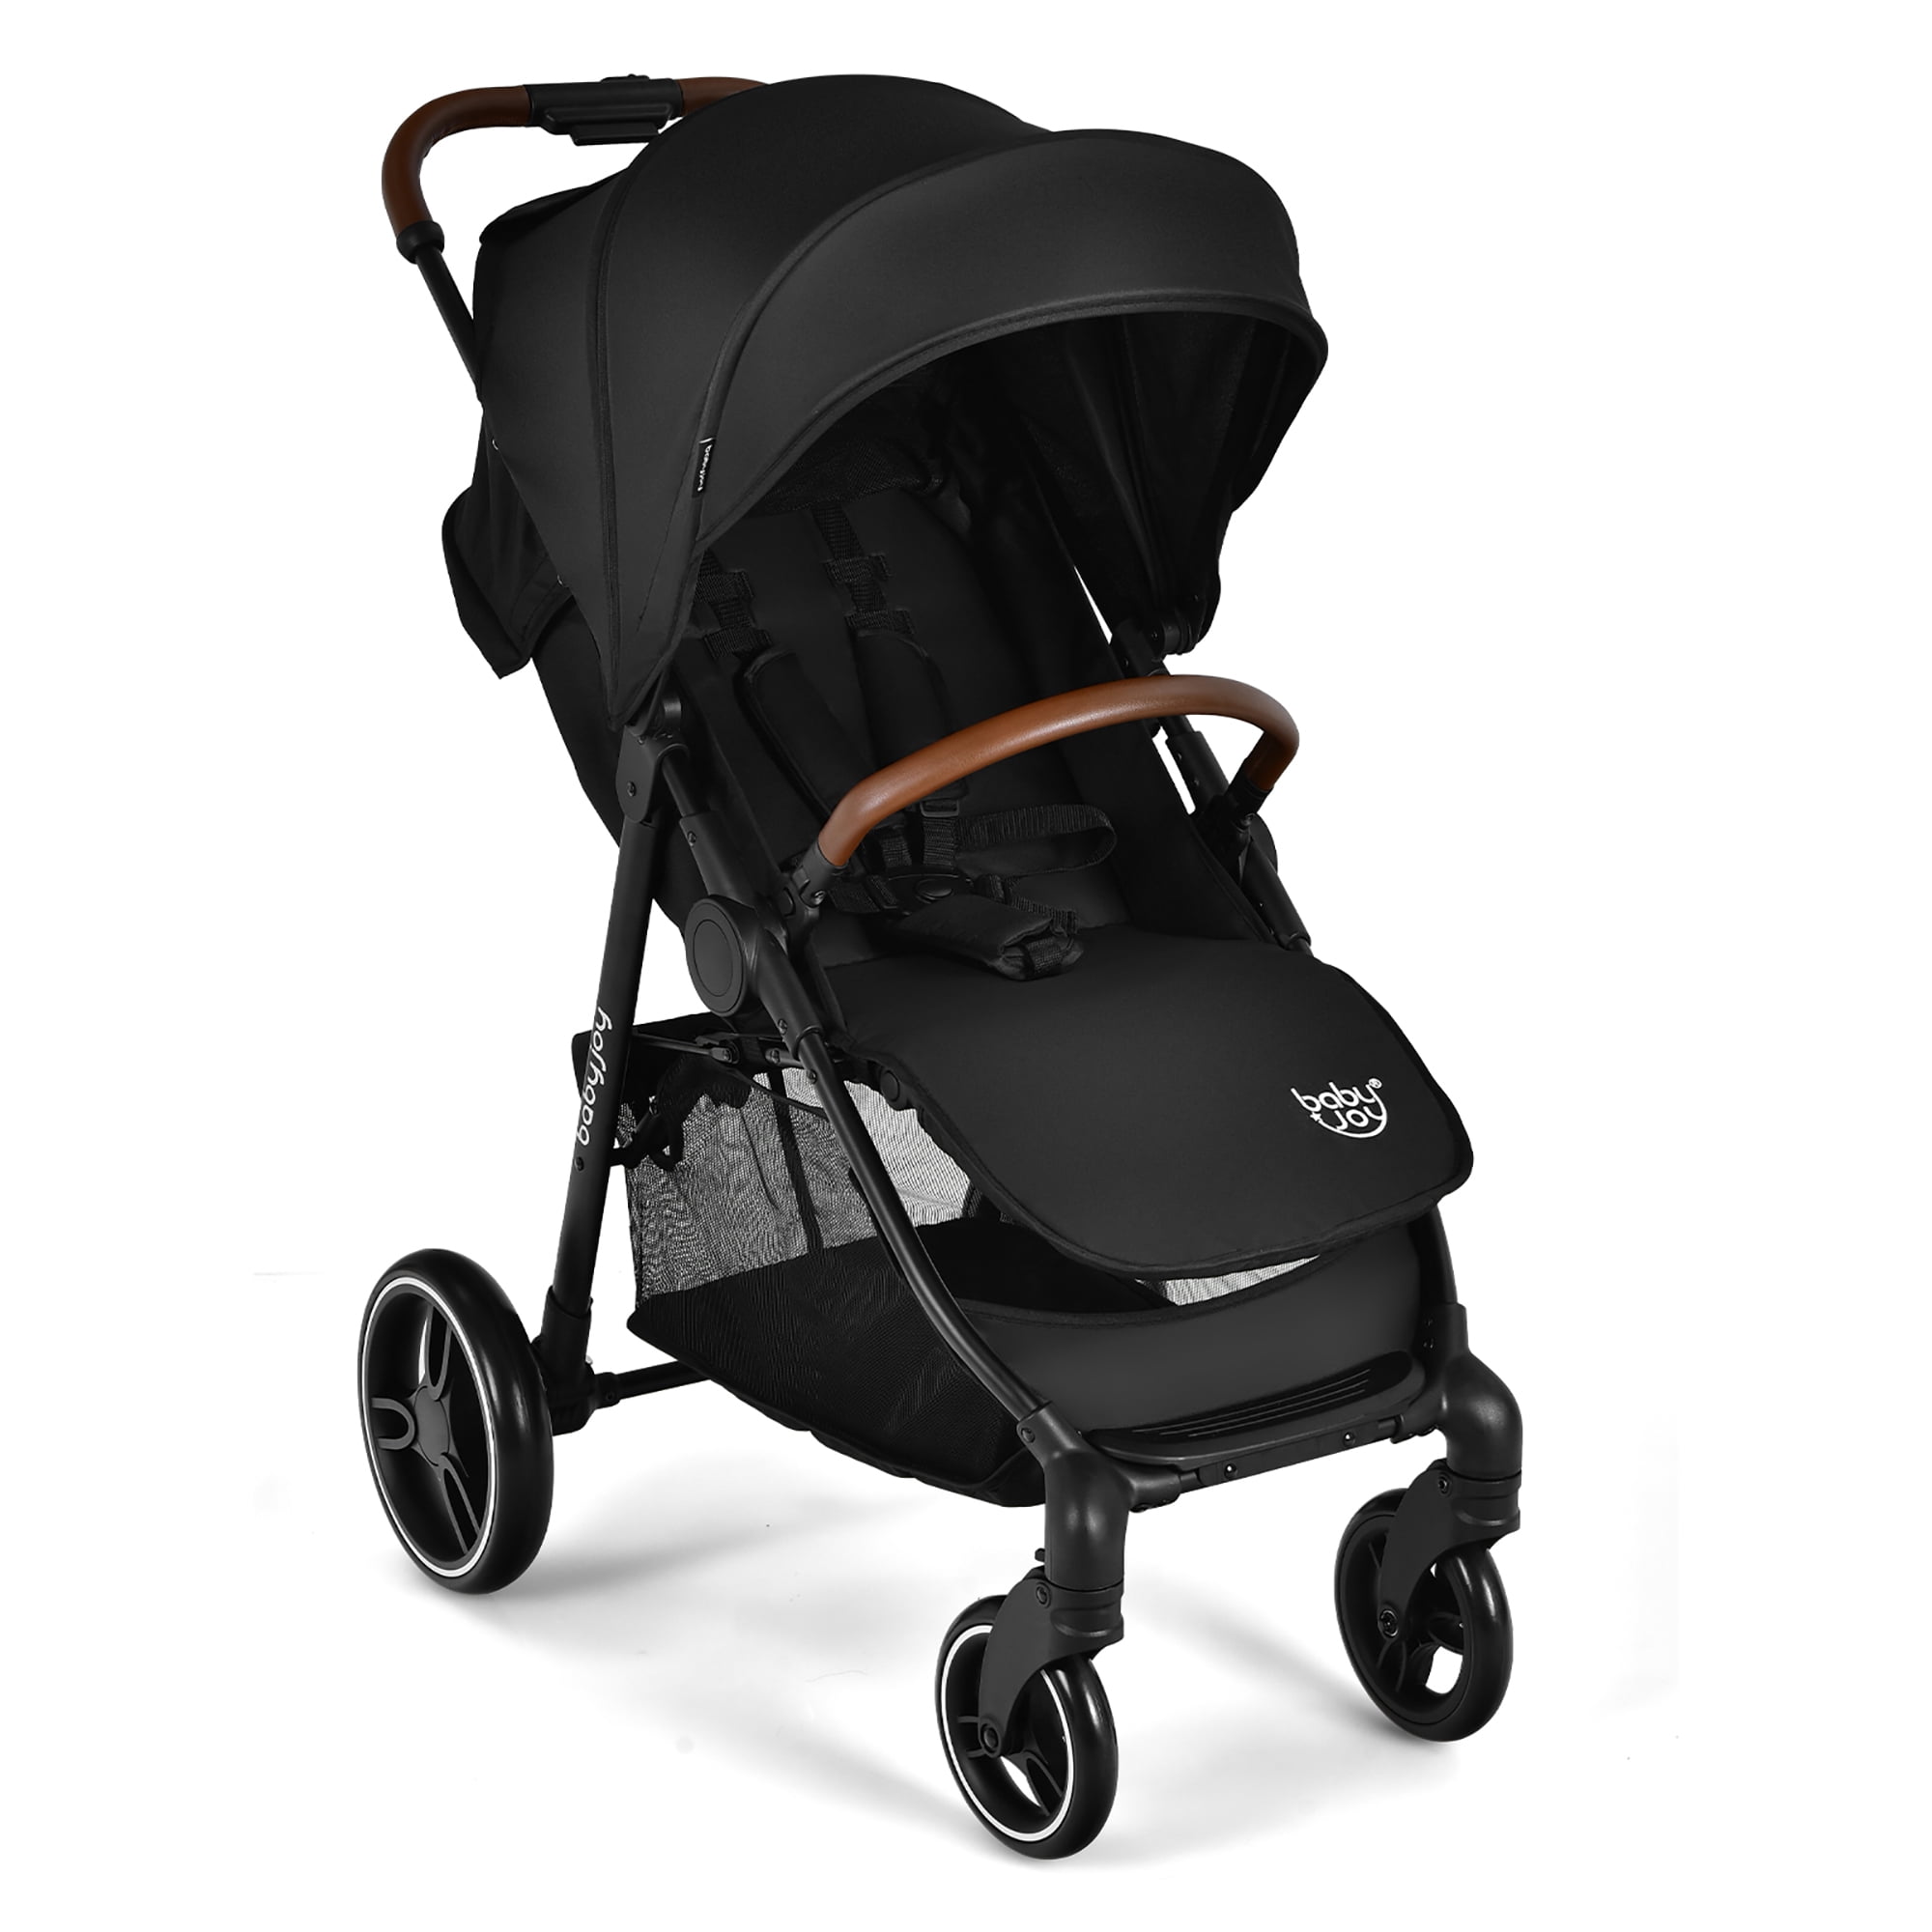 UNIVERSAL FOOTMUFF BLACK FIT PUSHCHAIR BUGGY COMPATIBLE WITH KINDERKRAFT 